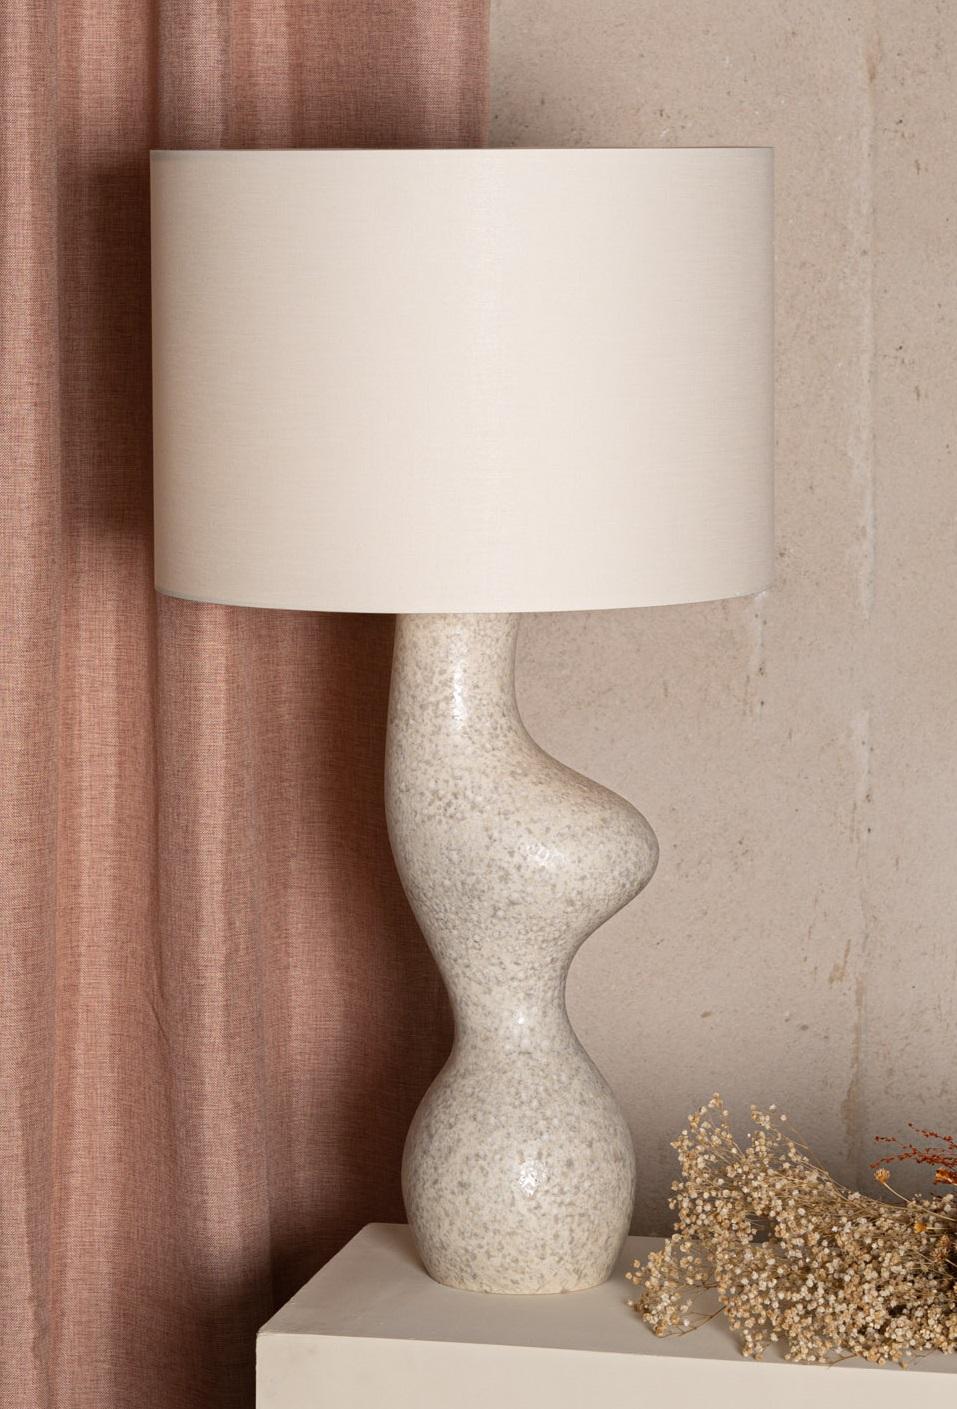 Grey Reactive Ceramic Venuso Table Lamp by Simone & Marcel
Dimensions: Ø 50 x H 78 cm.
Materials: Cotton and ceramic.

Also available in different ceramic options. Custom options available on request. Please contact us. 

All our lamps can be wired